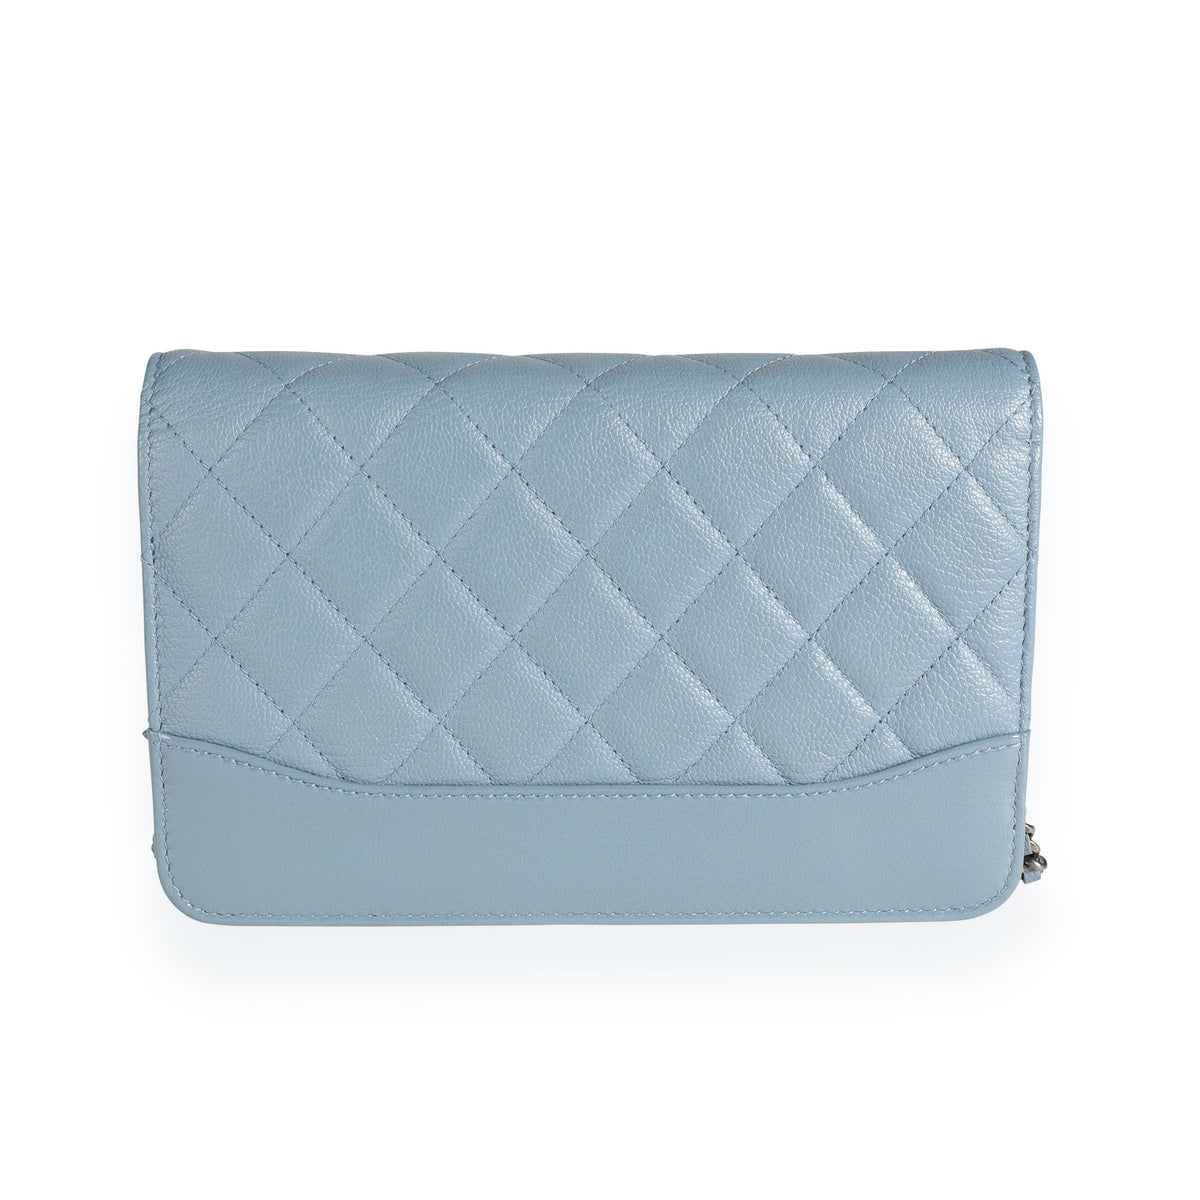 Chanel Gabrielle Double Zip Clutch with Chain Quilted Ombre